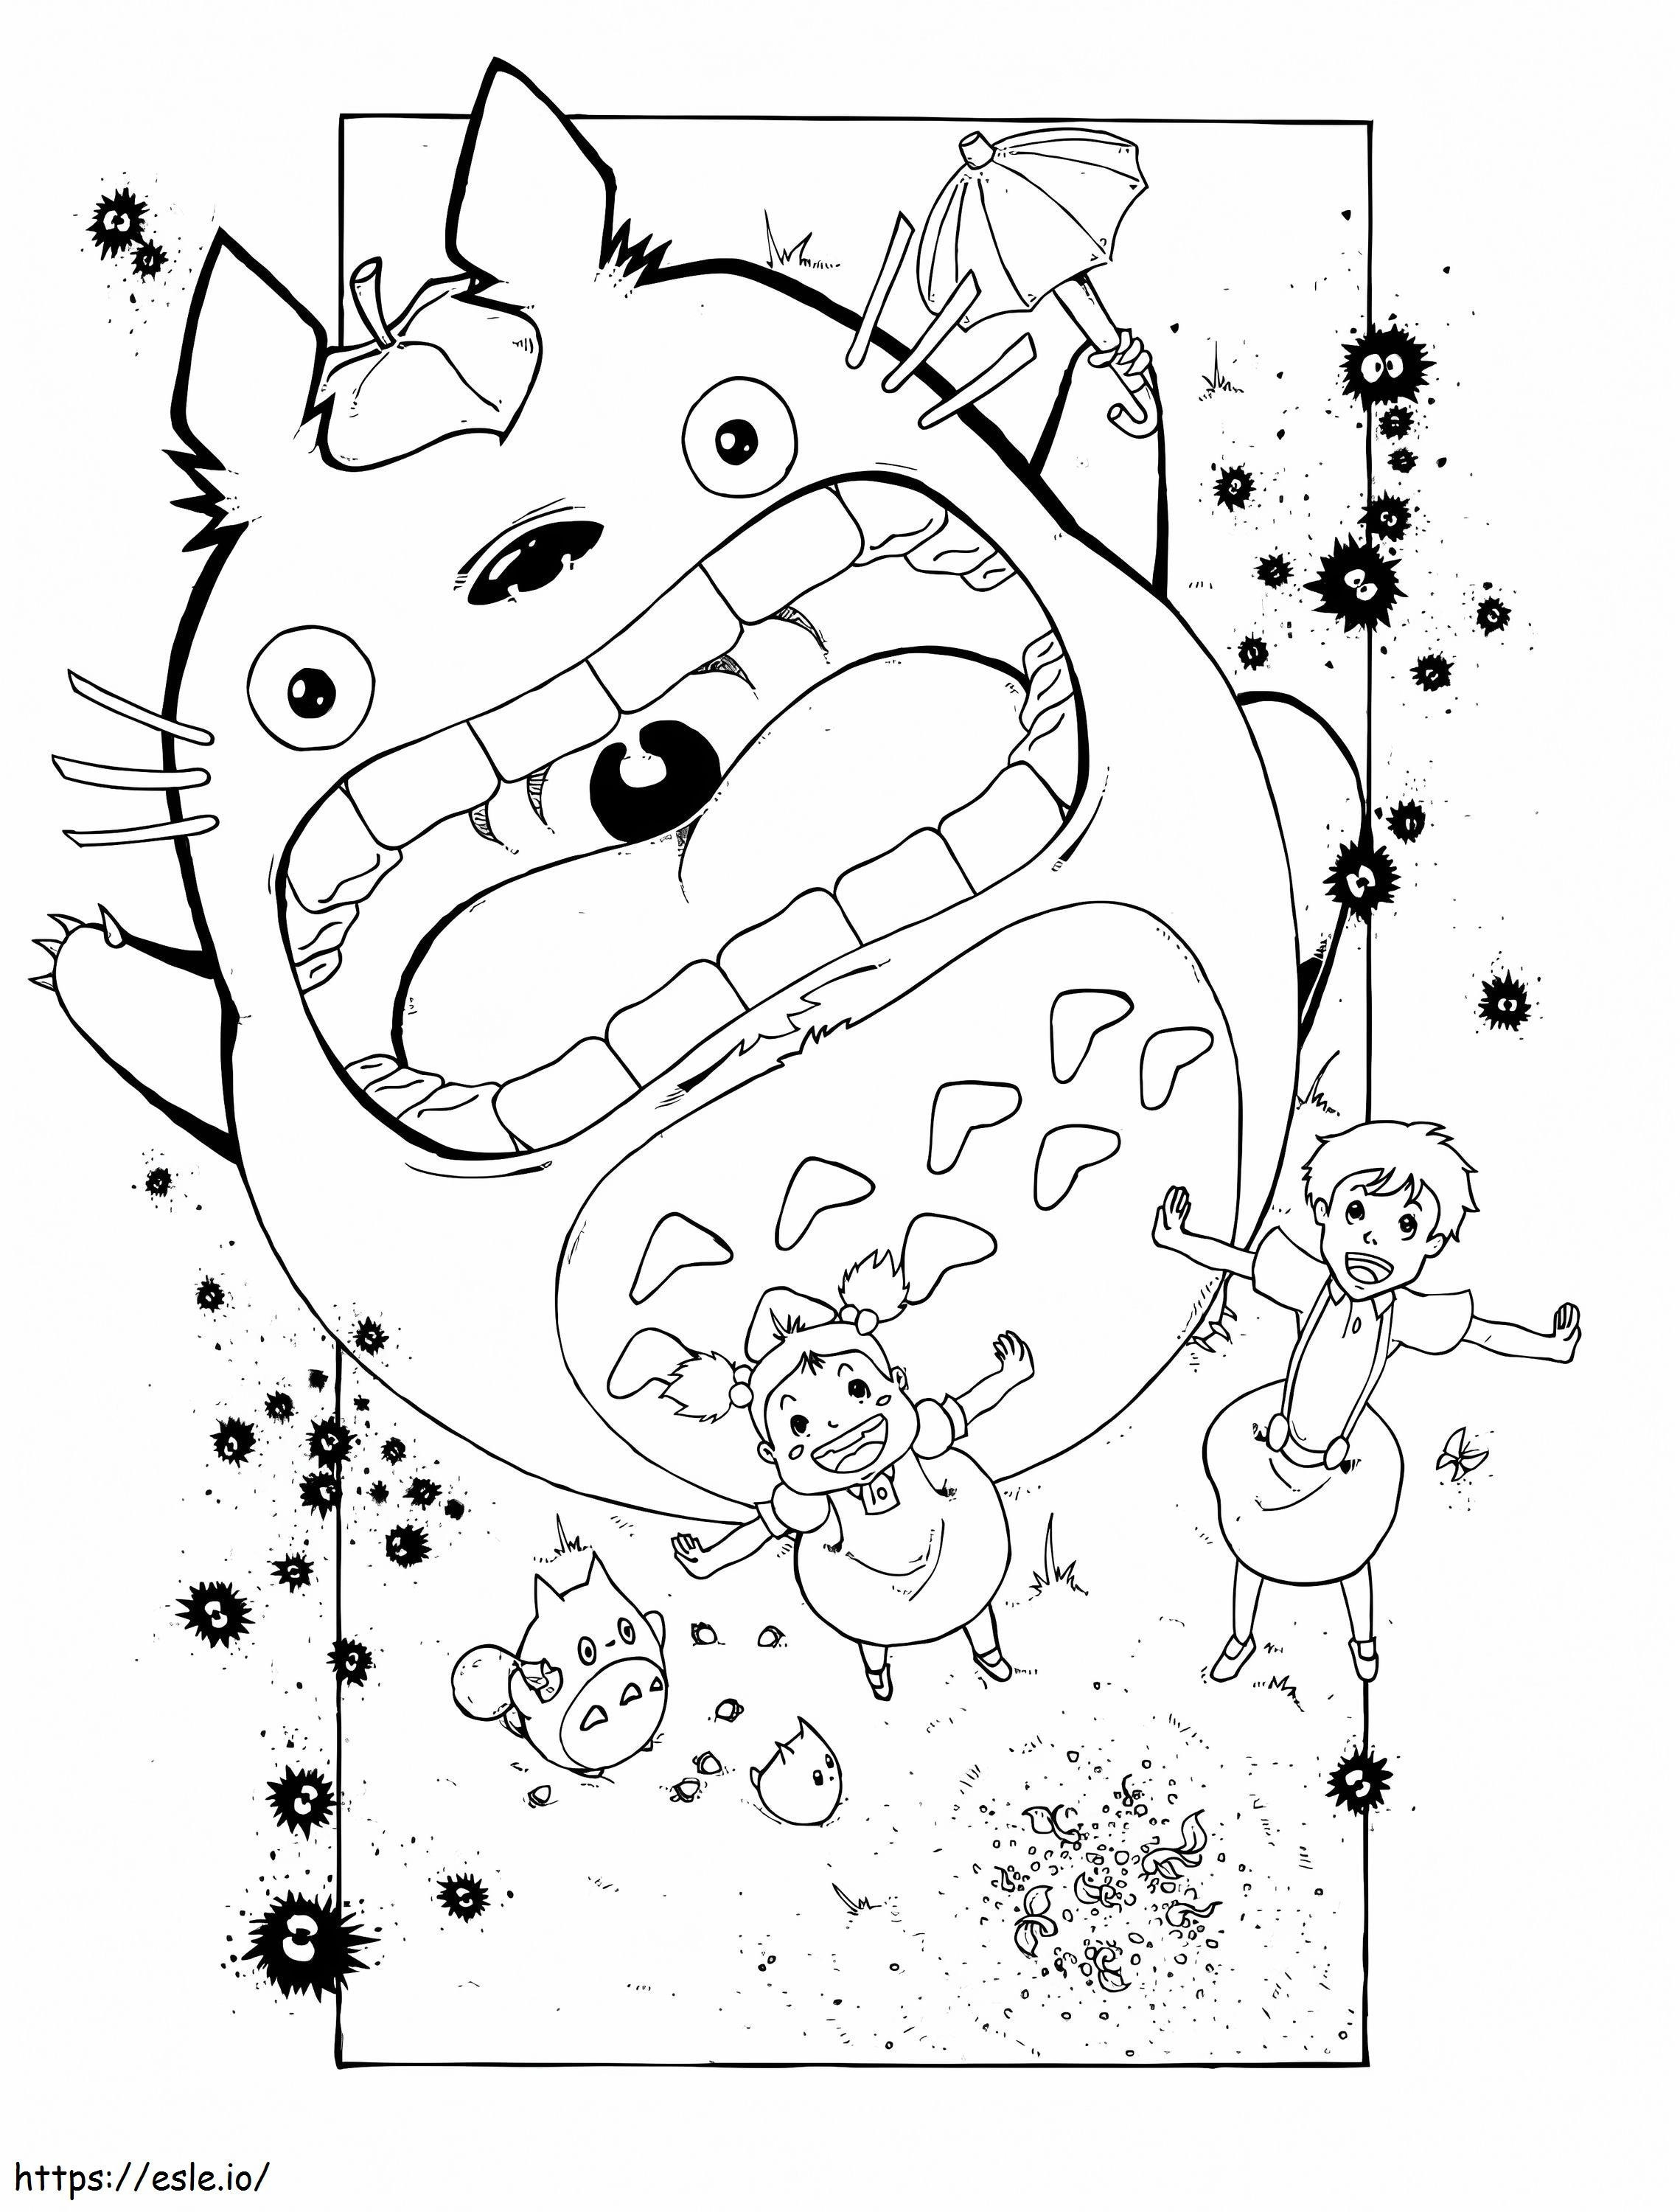 Totoro Screaming coloring page